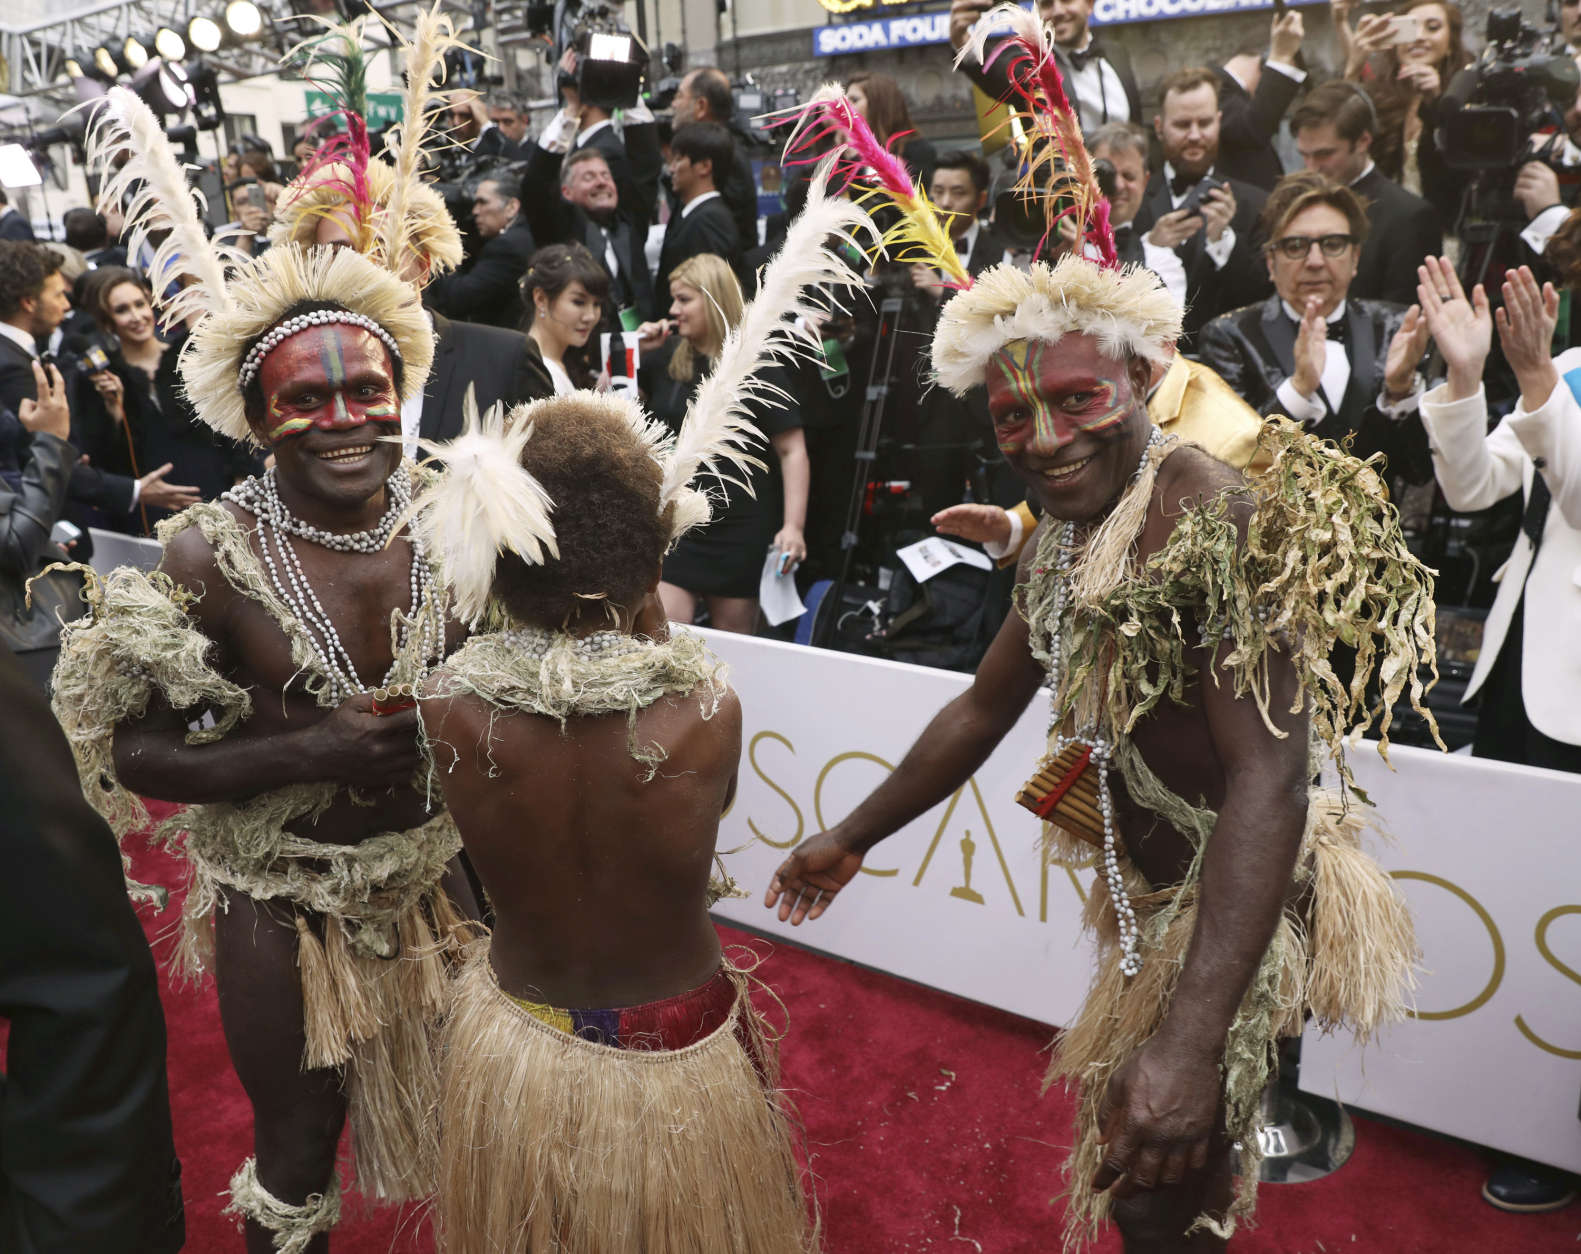 Members from the cast of "Tanna" arrive at the Oscars on Sunday, Feb. 26, 2017, at the Dolby Theatre in Los Angeles. (Photo by Matt Sayles/Invision/AP)